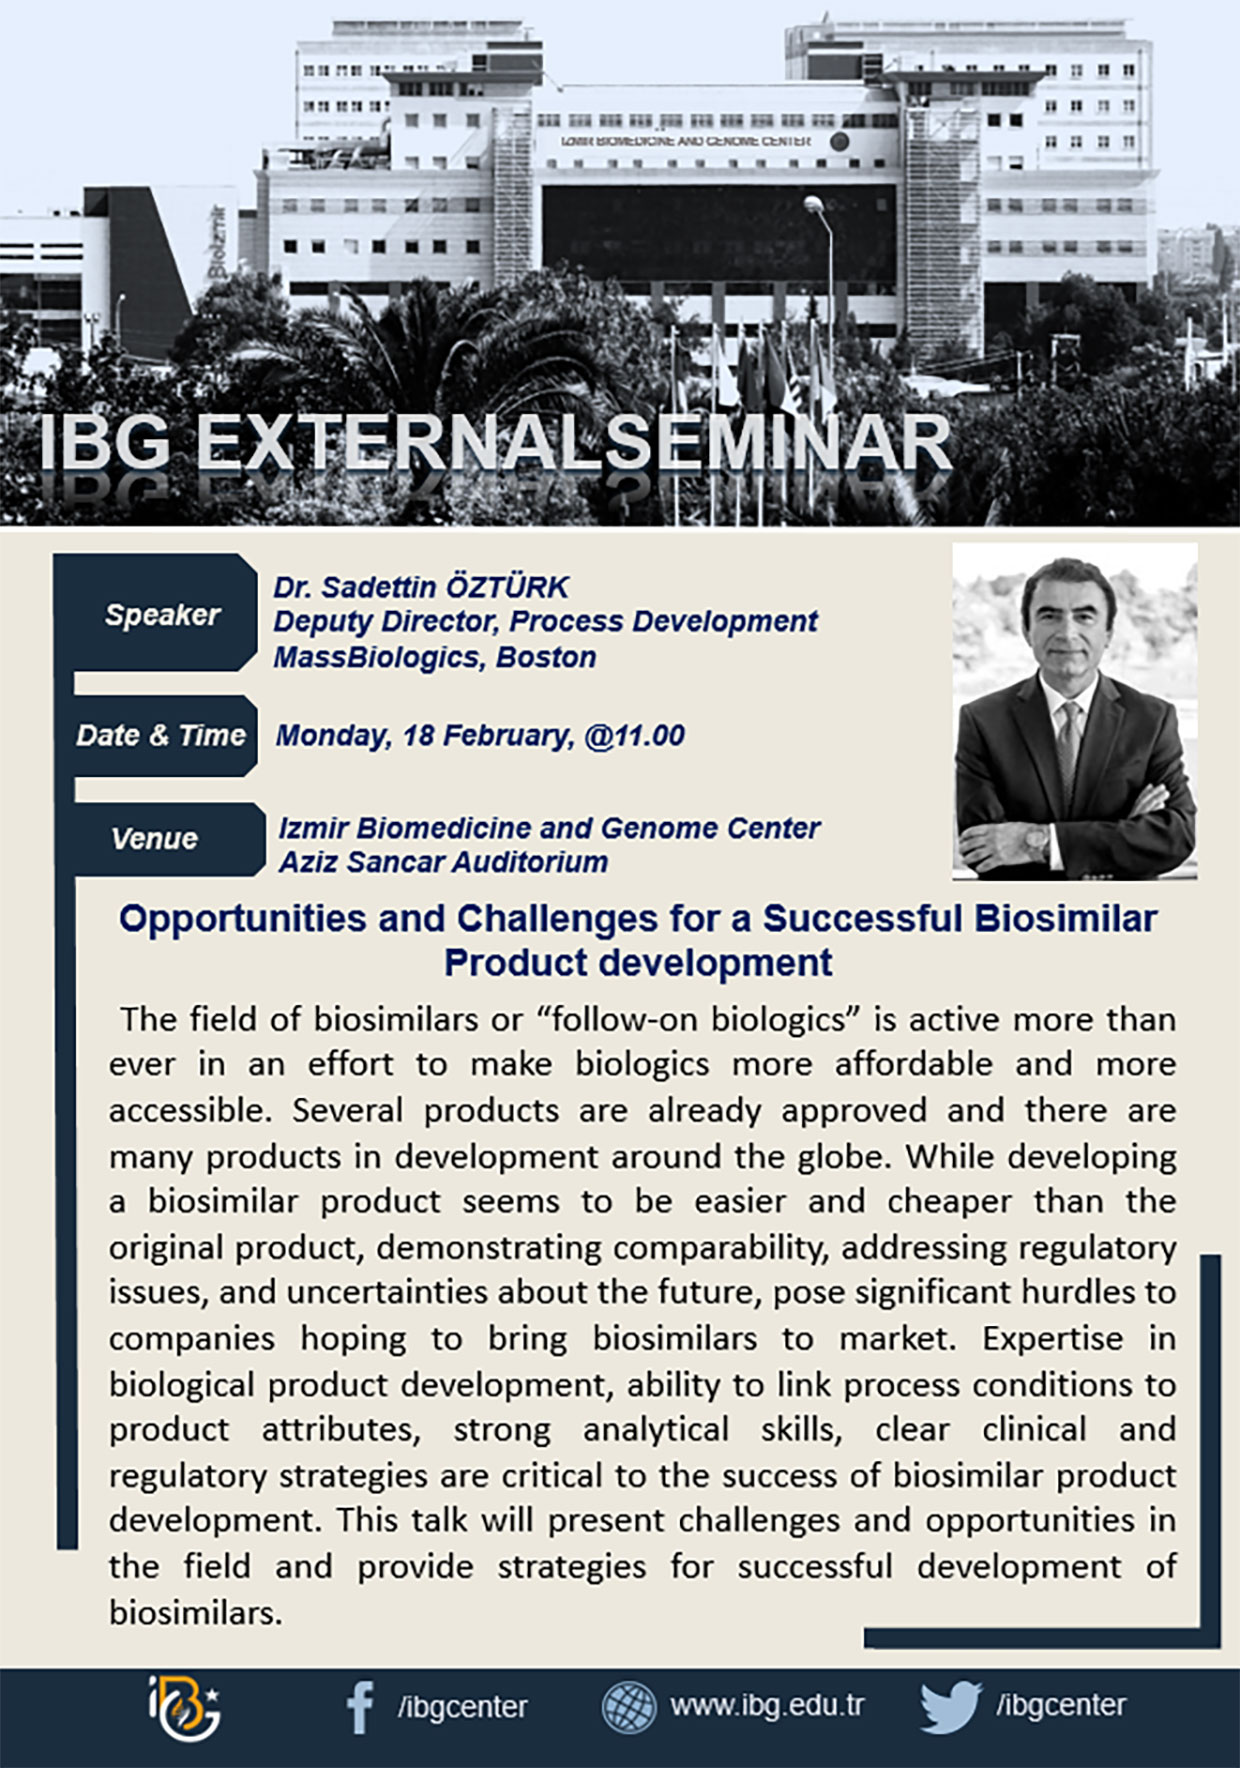 Opportunities and Challenges for a Successful Biosimilar Product Development